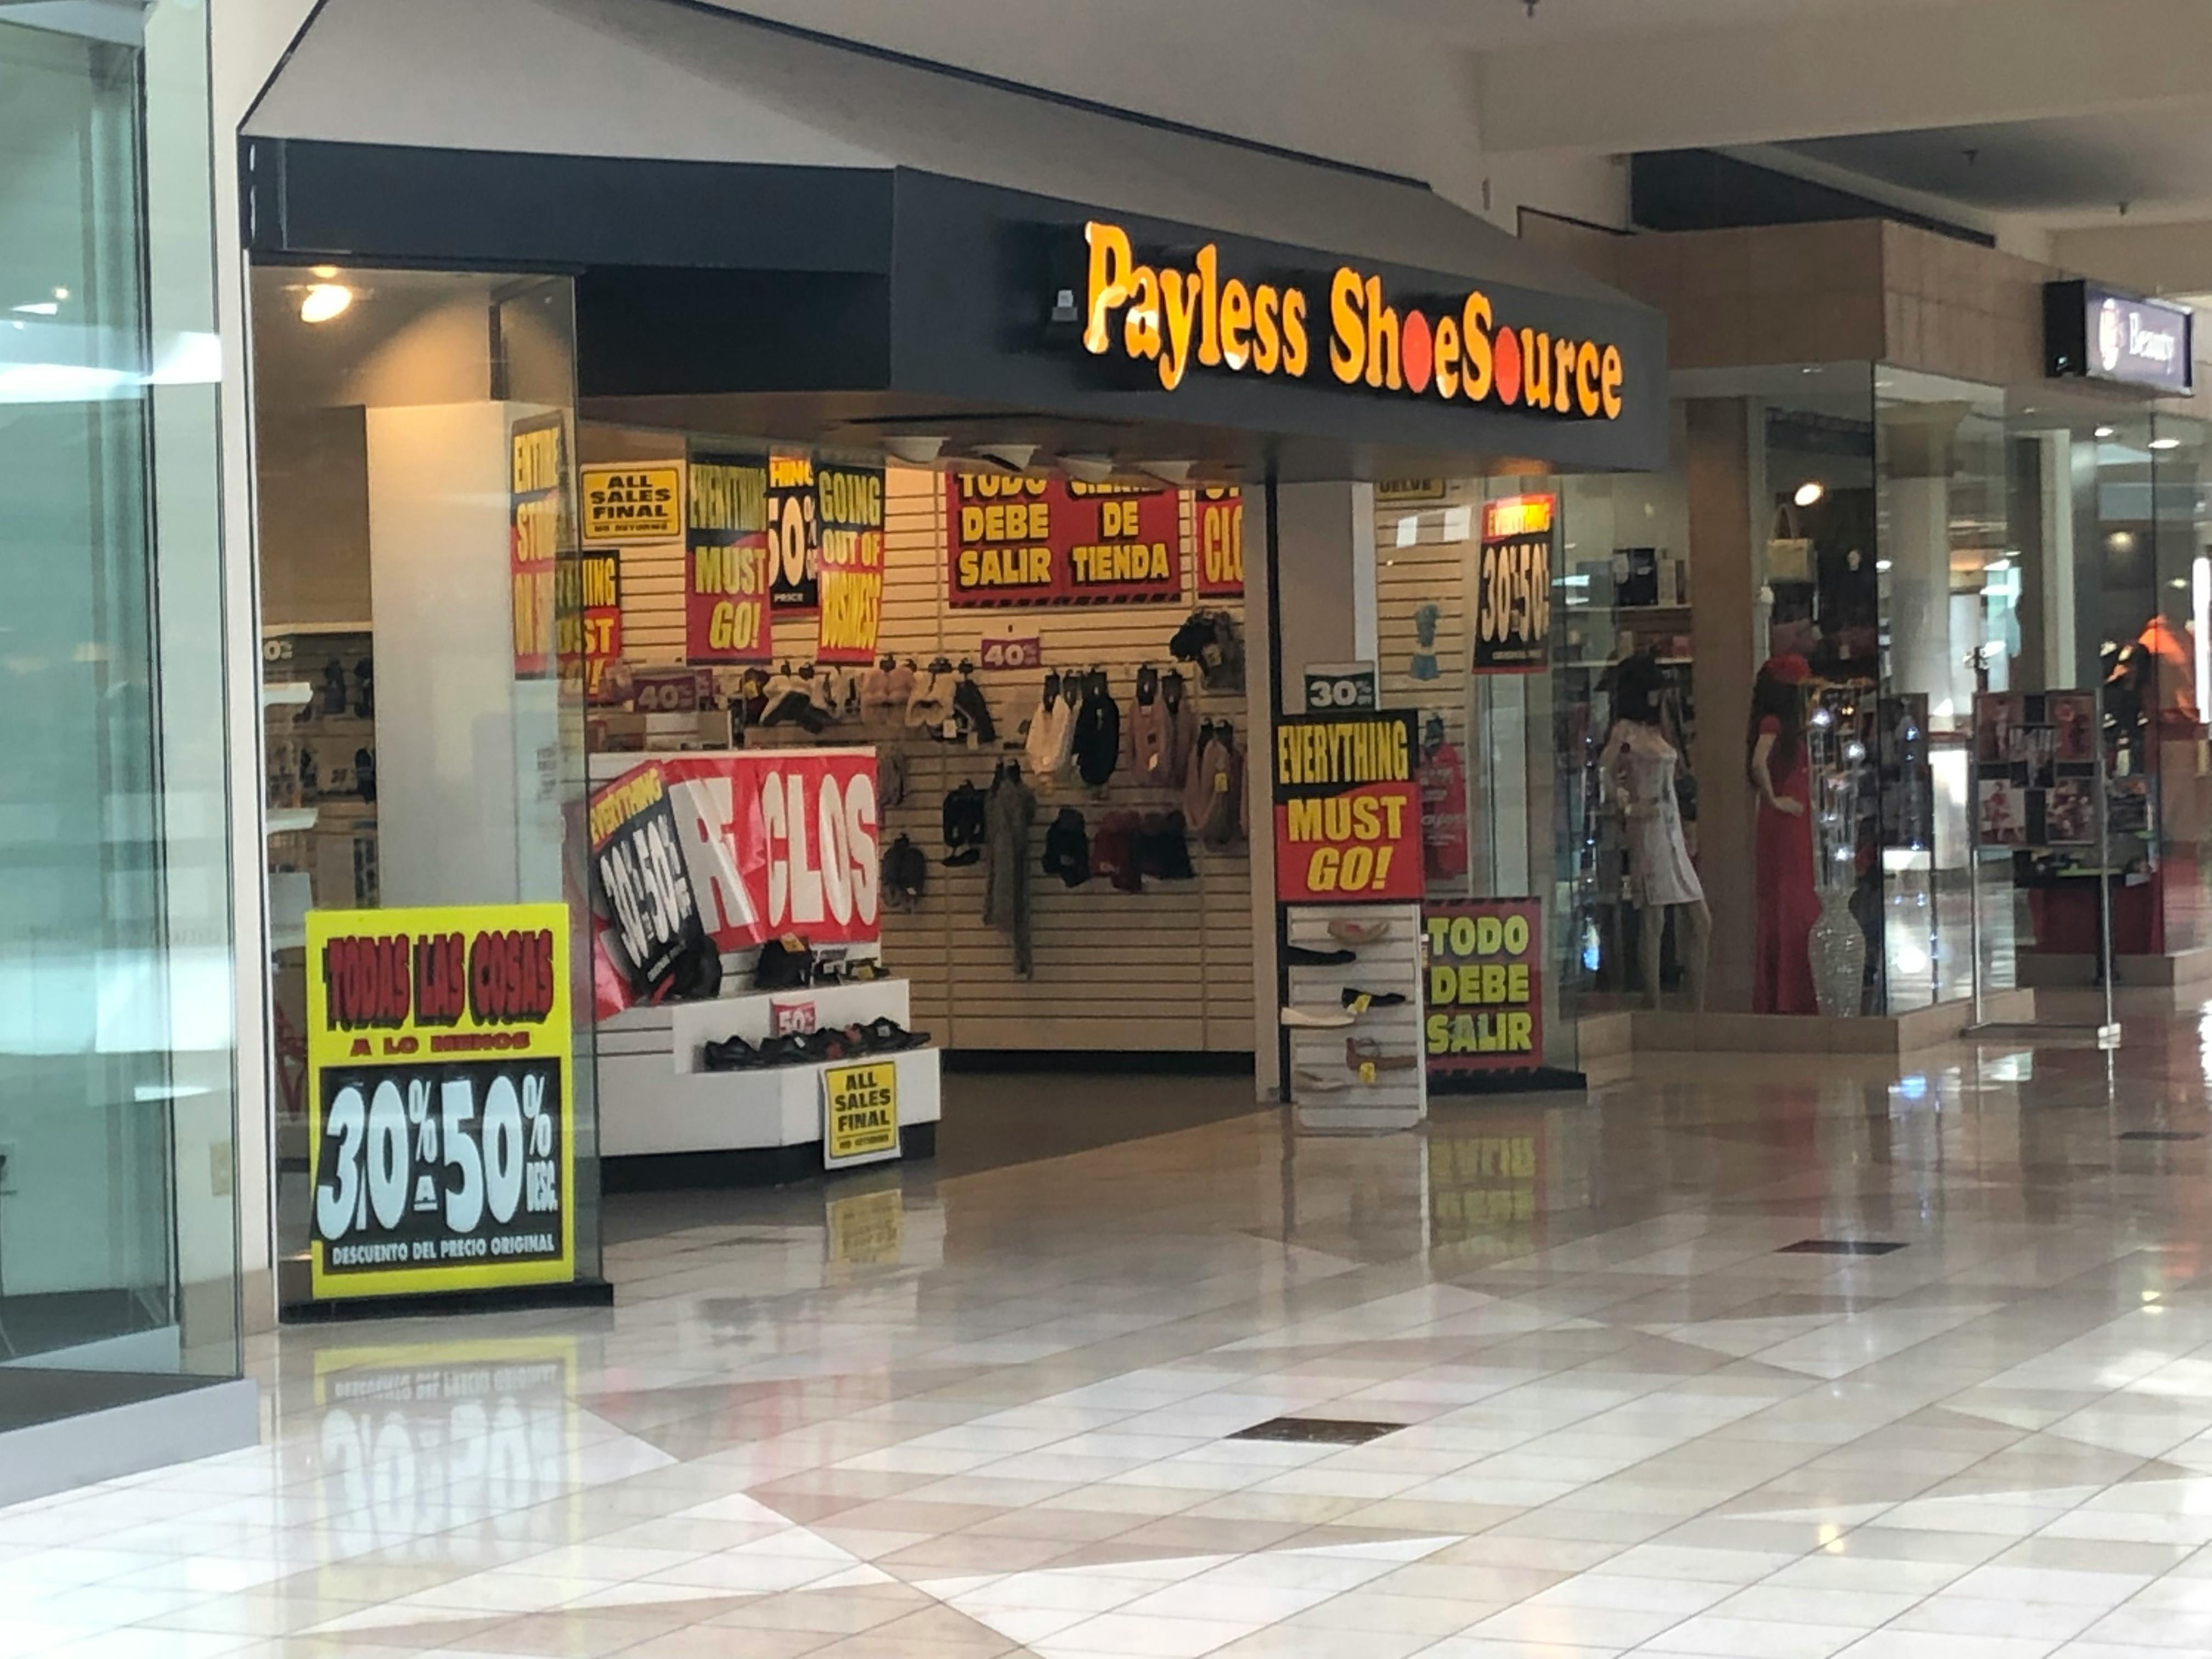 Payless Is Back and Planning to Open New Shoe Stores - The Krazy Coupon Lady